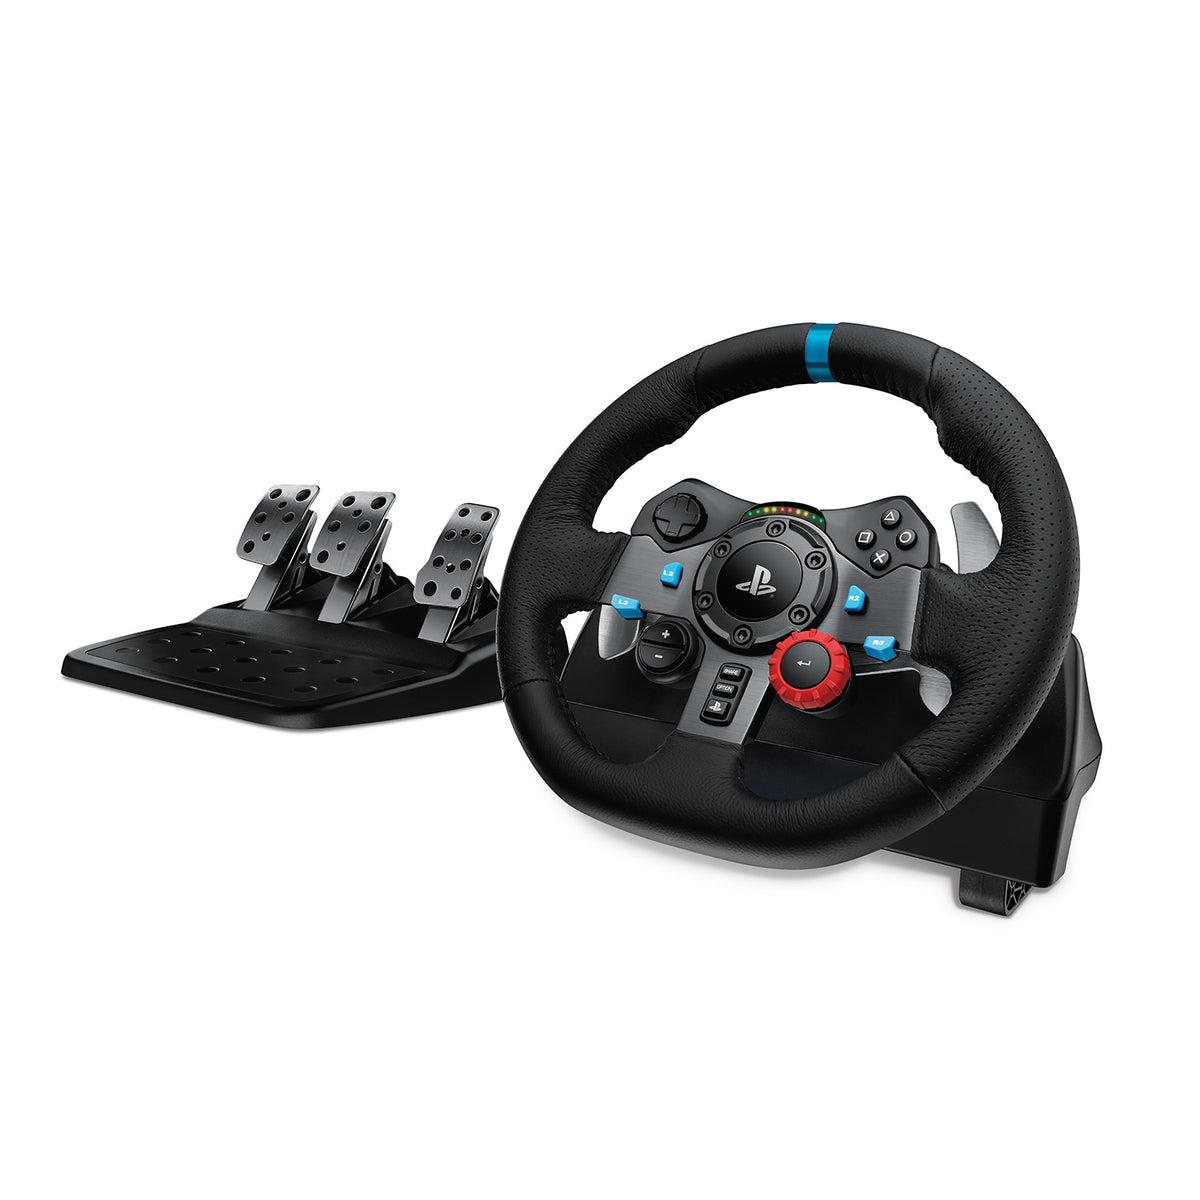 Logitech Driving Force G29 - Steering wheel and pedals set - with cable - for Sony PlayStation 3, Sony PlayStation 4